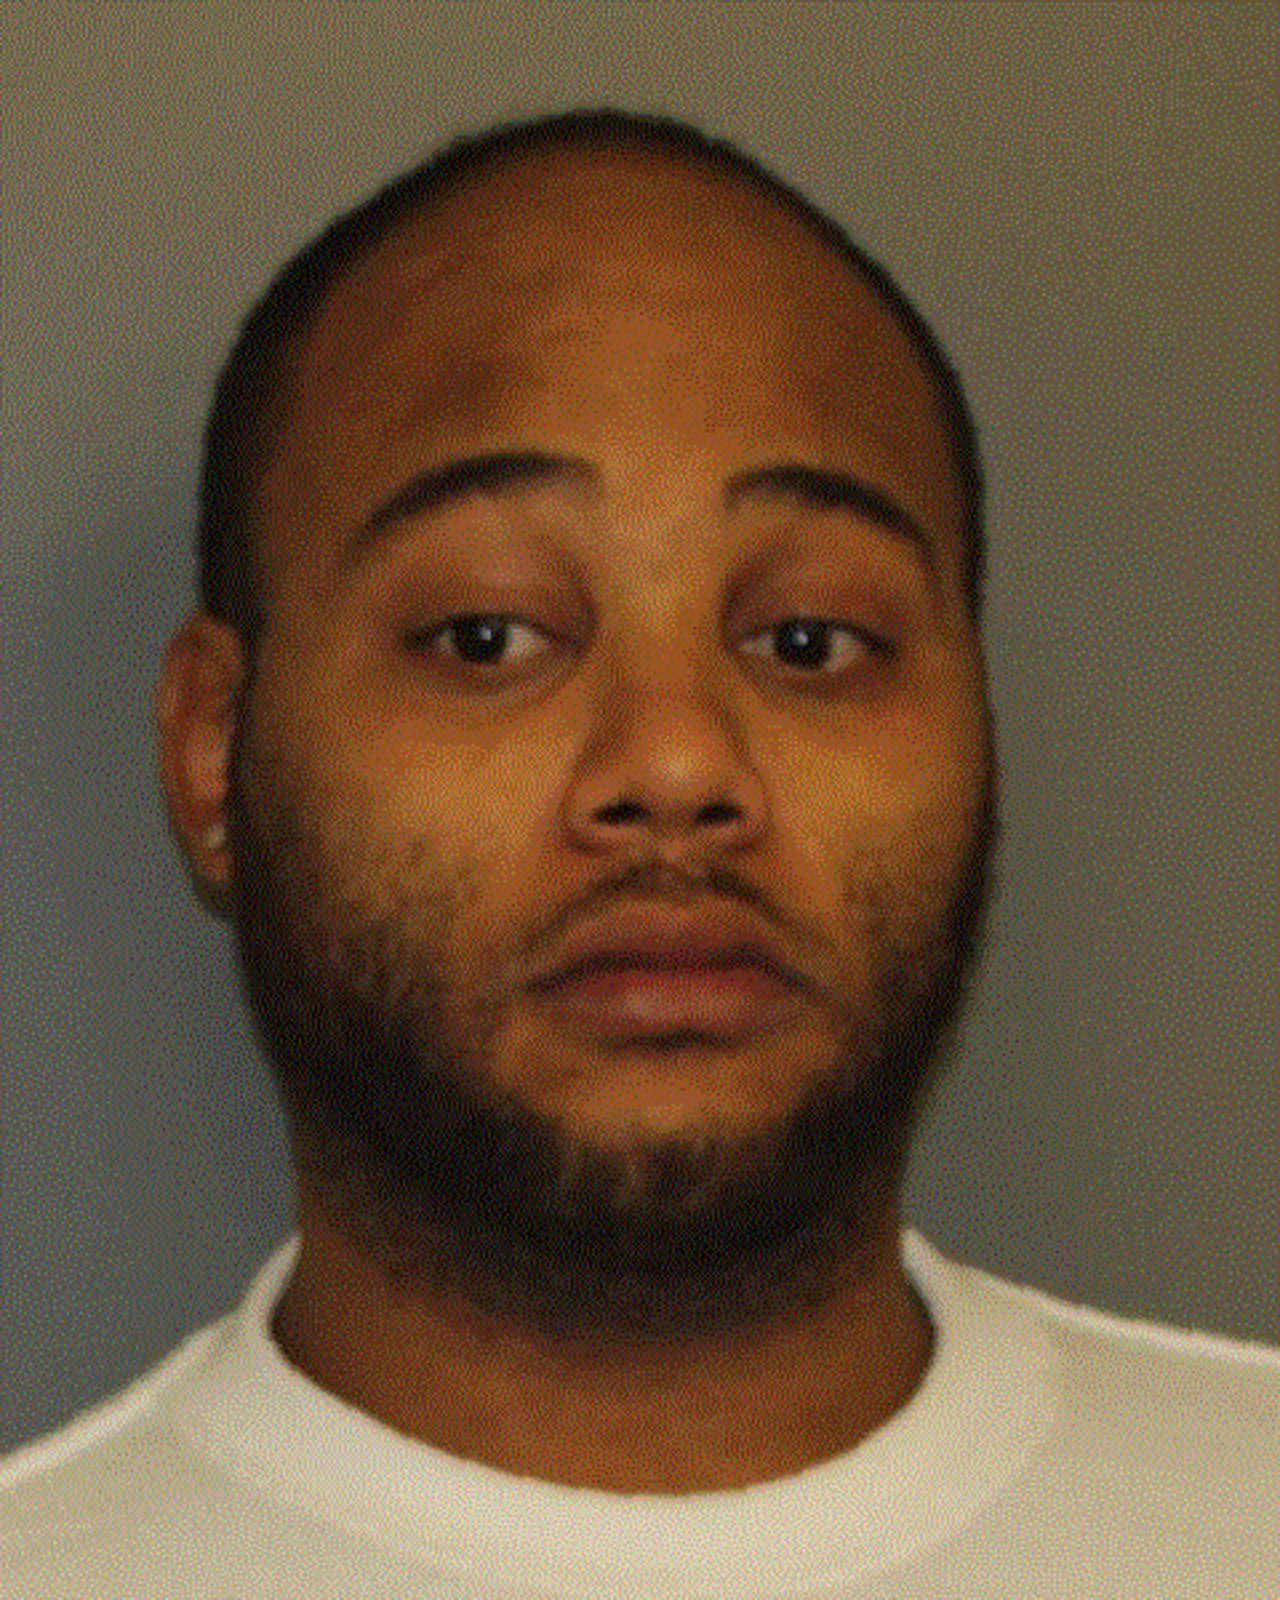 State Police charged Arthur V. Sherwood Jr., 29, of the Bronx with identity theft after he attempted to purchase two motorcycles with a false identity. 